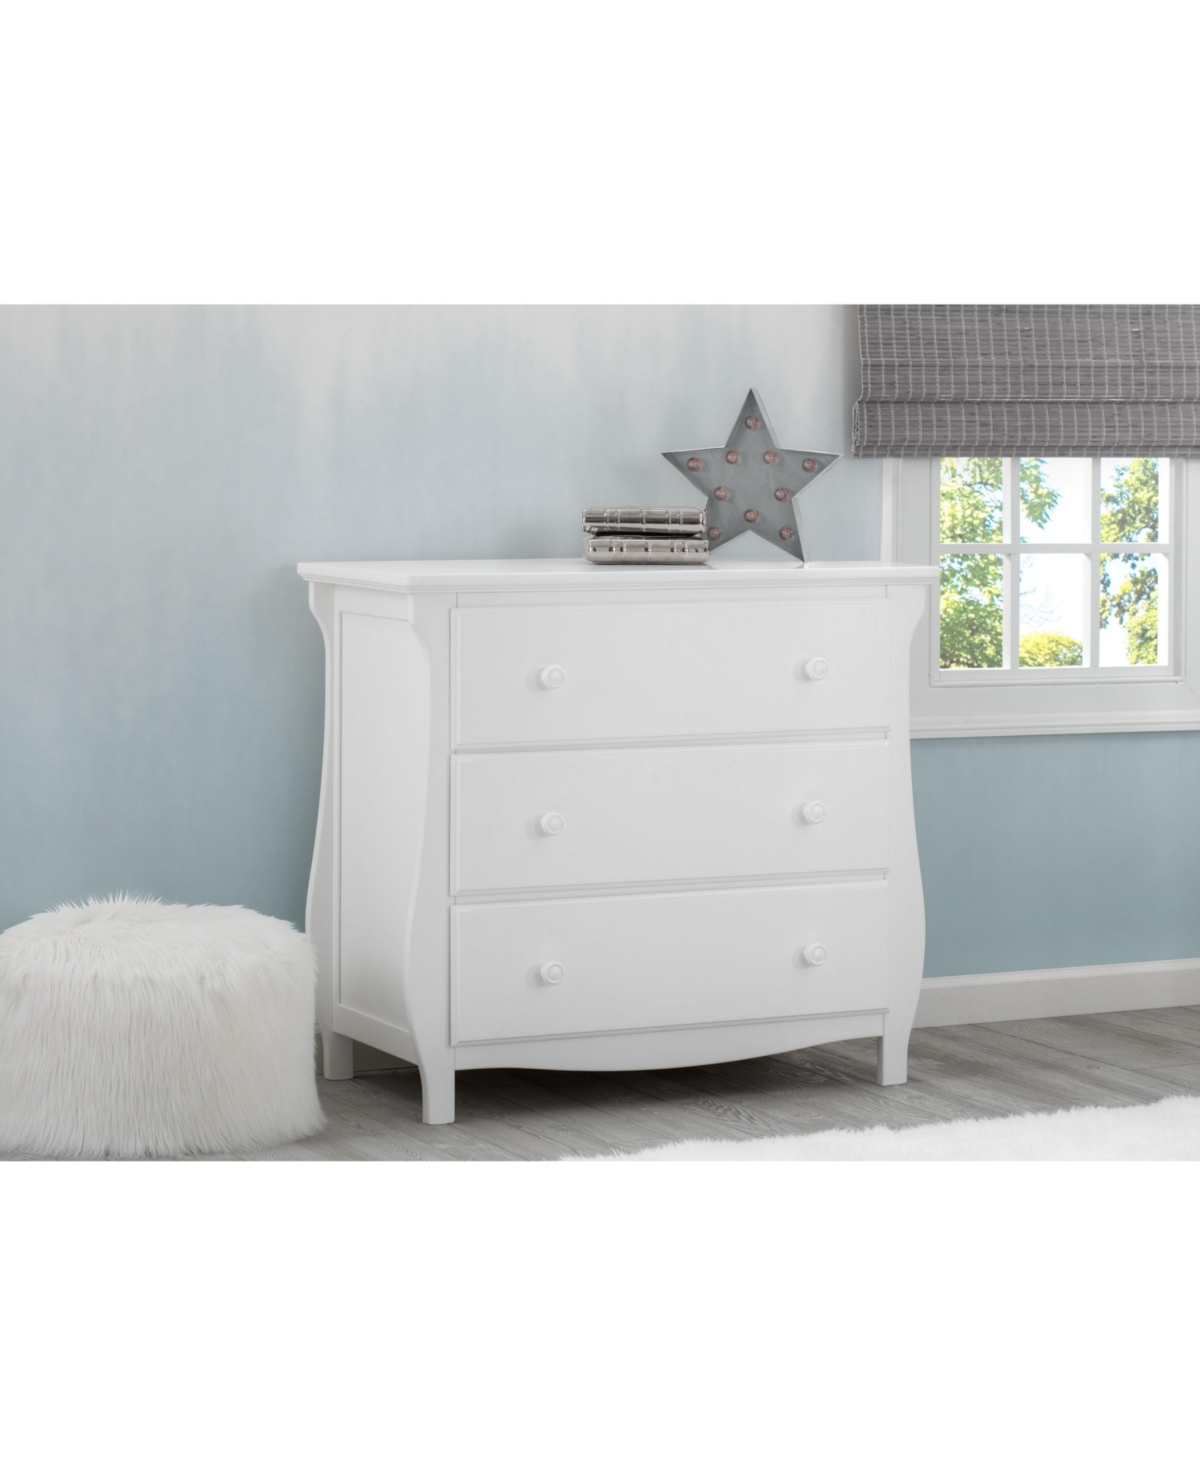 12707460 Chestopher Dresser with Changing Top sku 12707460